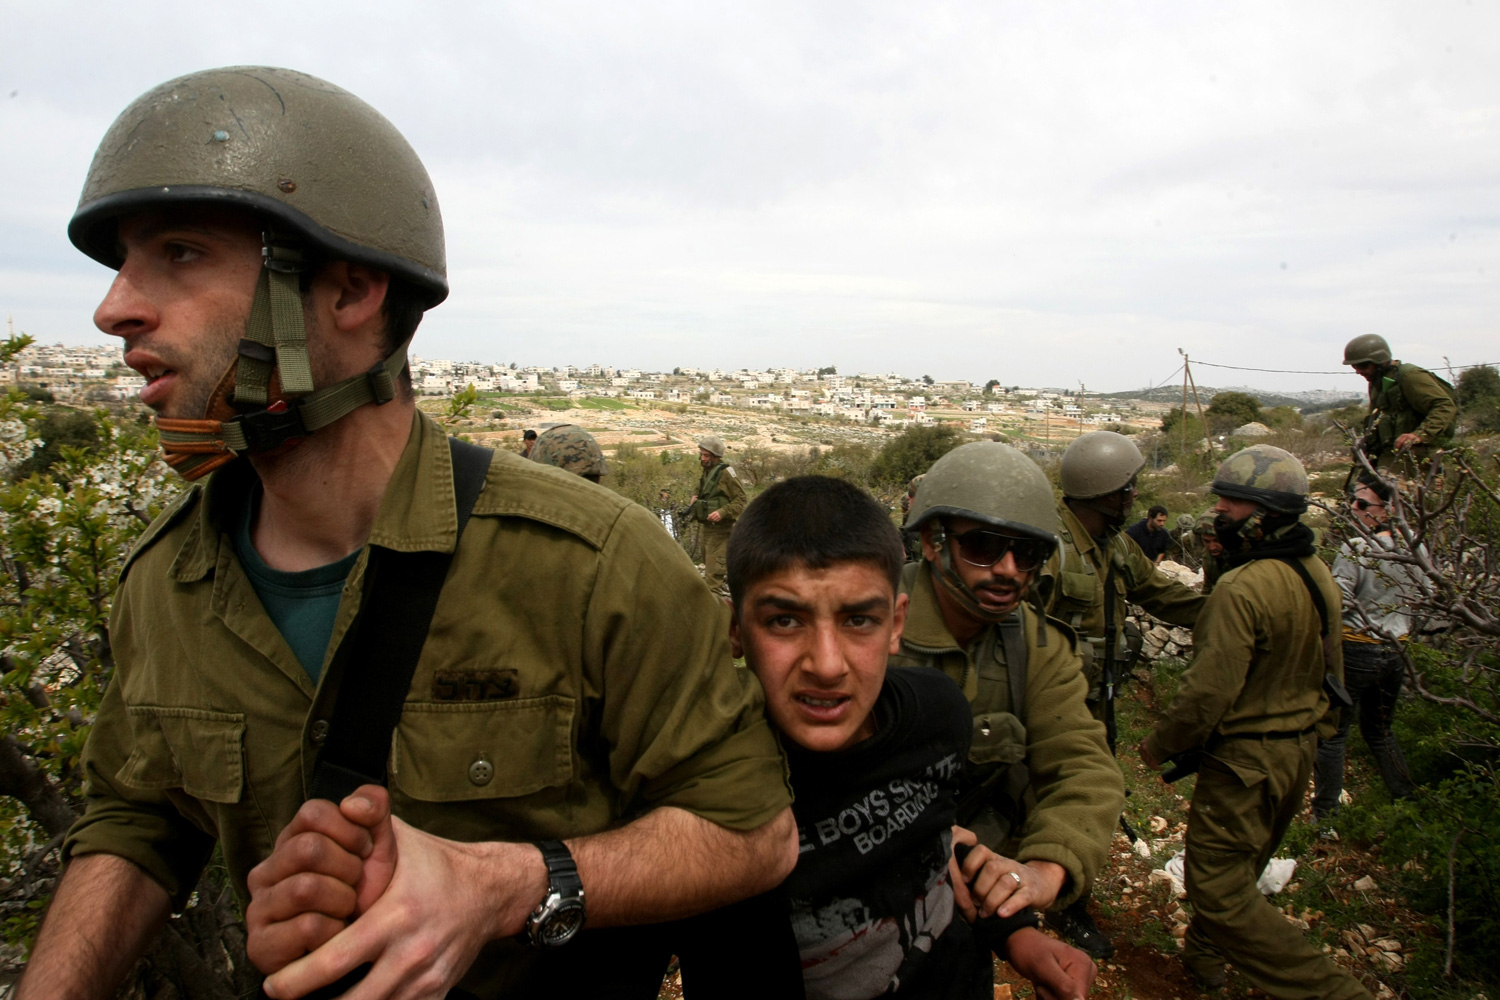 March 31, 2012. A Palestinian boy is detained by Israeli soldiers during a demonstration against the occupation of their village land and the building of the Israeli settlement of Karmei Tzour near the village of Beit Omar, north of the West Bank town of Hebron.